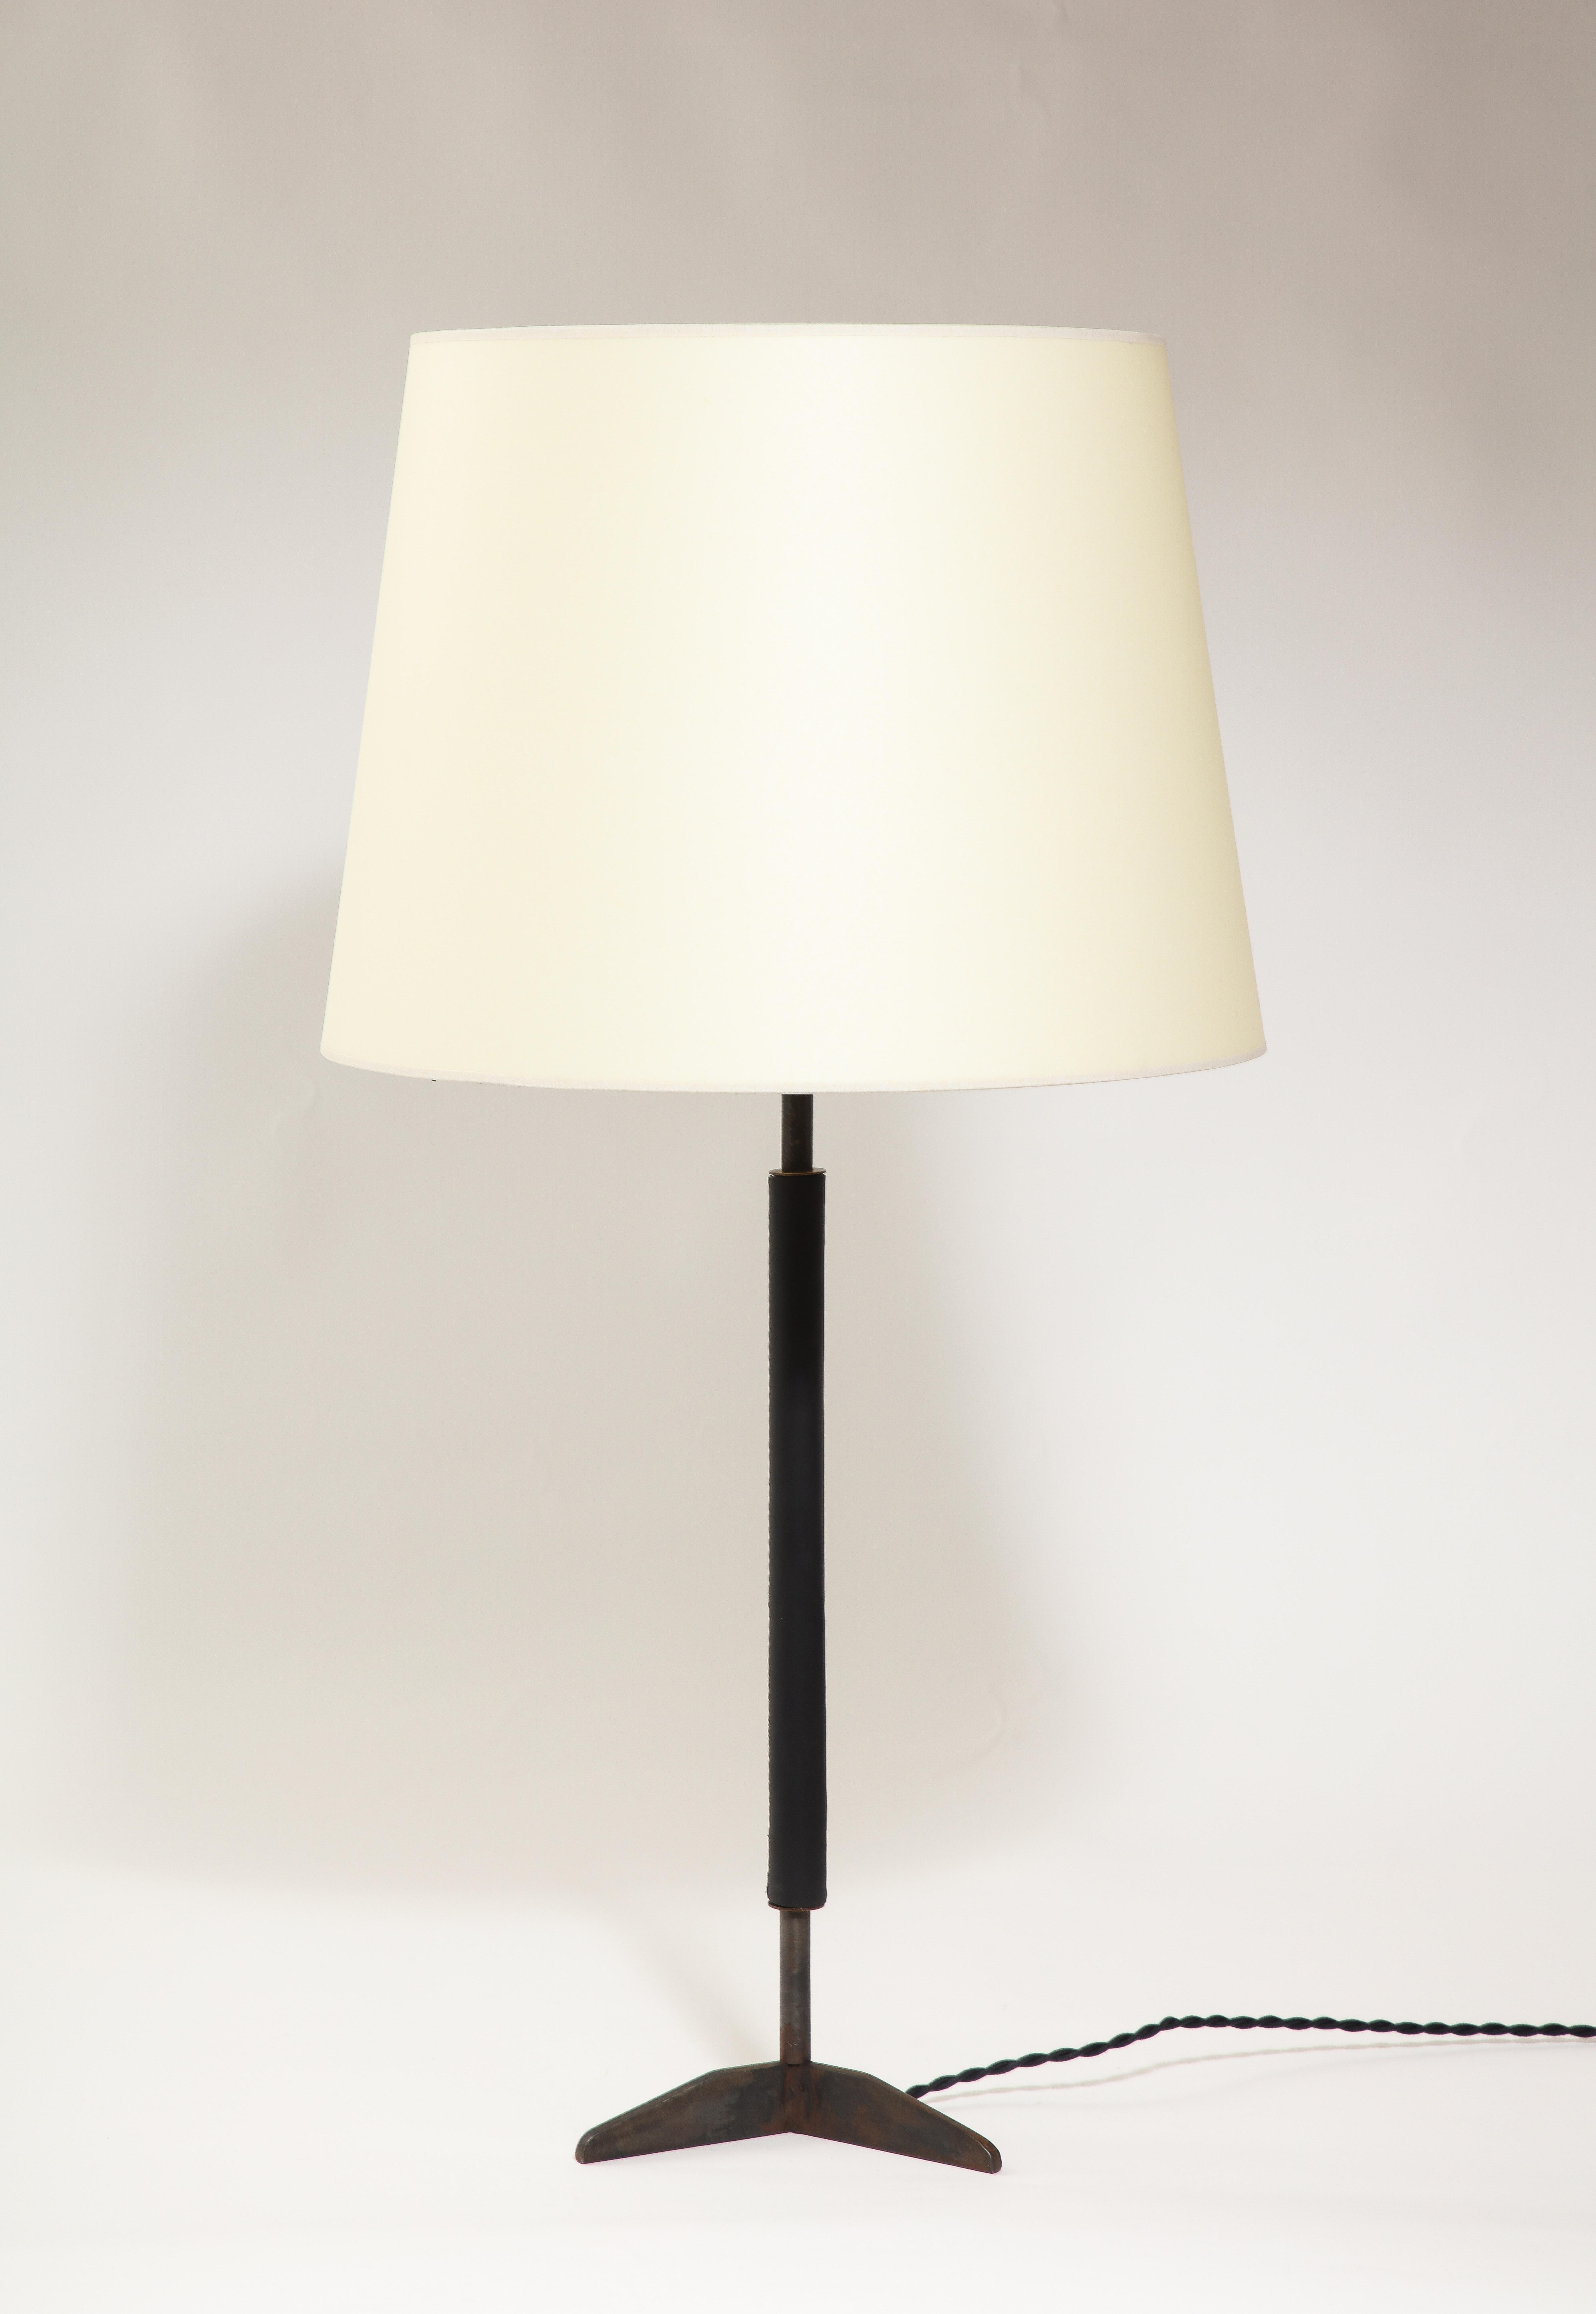 Blackened Steel & Leather Table Lamp, France 1950 For Sale 5